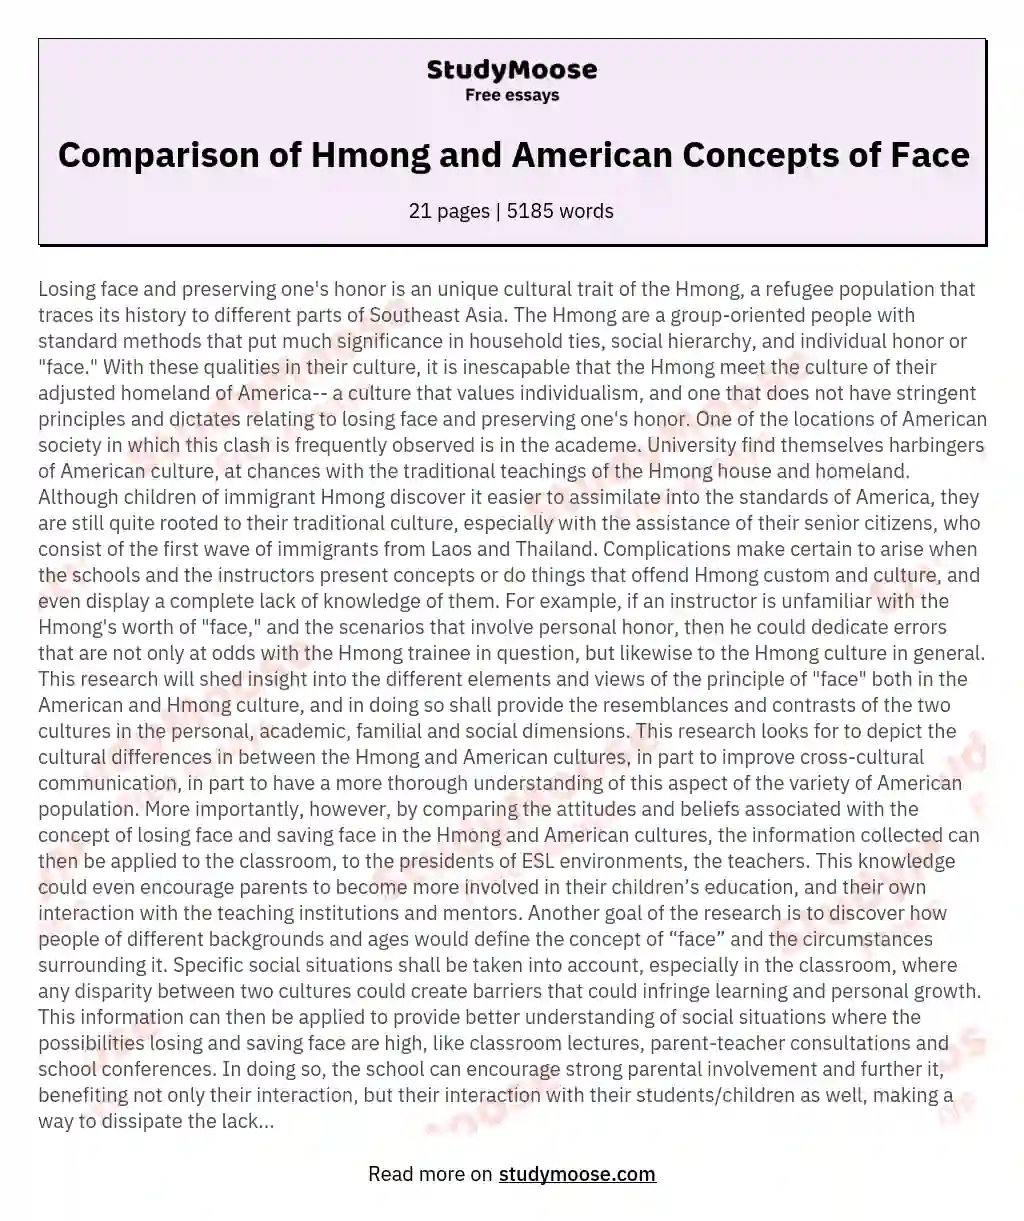 Comparison of Hmong and American Concepts of Face essay